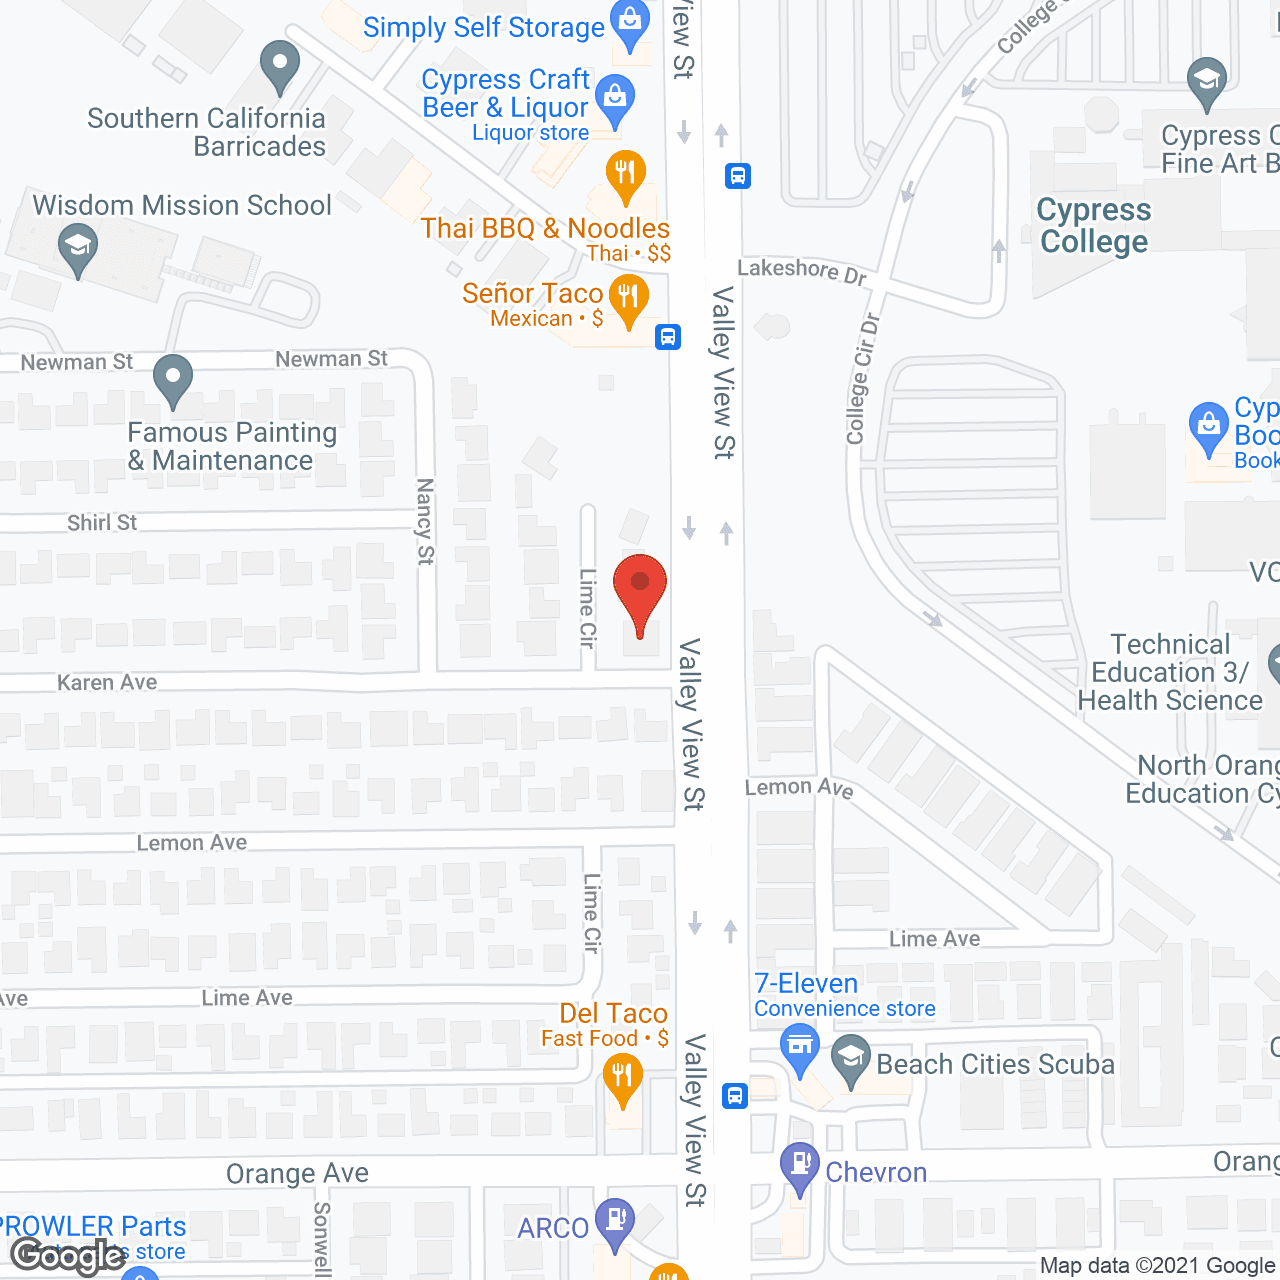 St. Therese Residential Care in google map